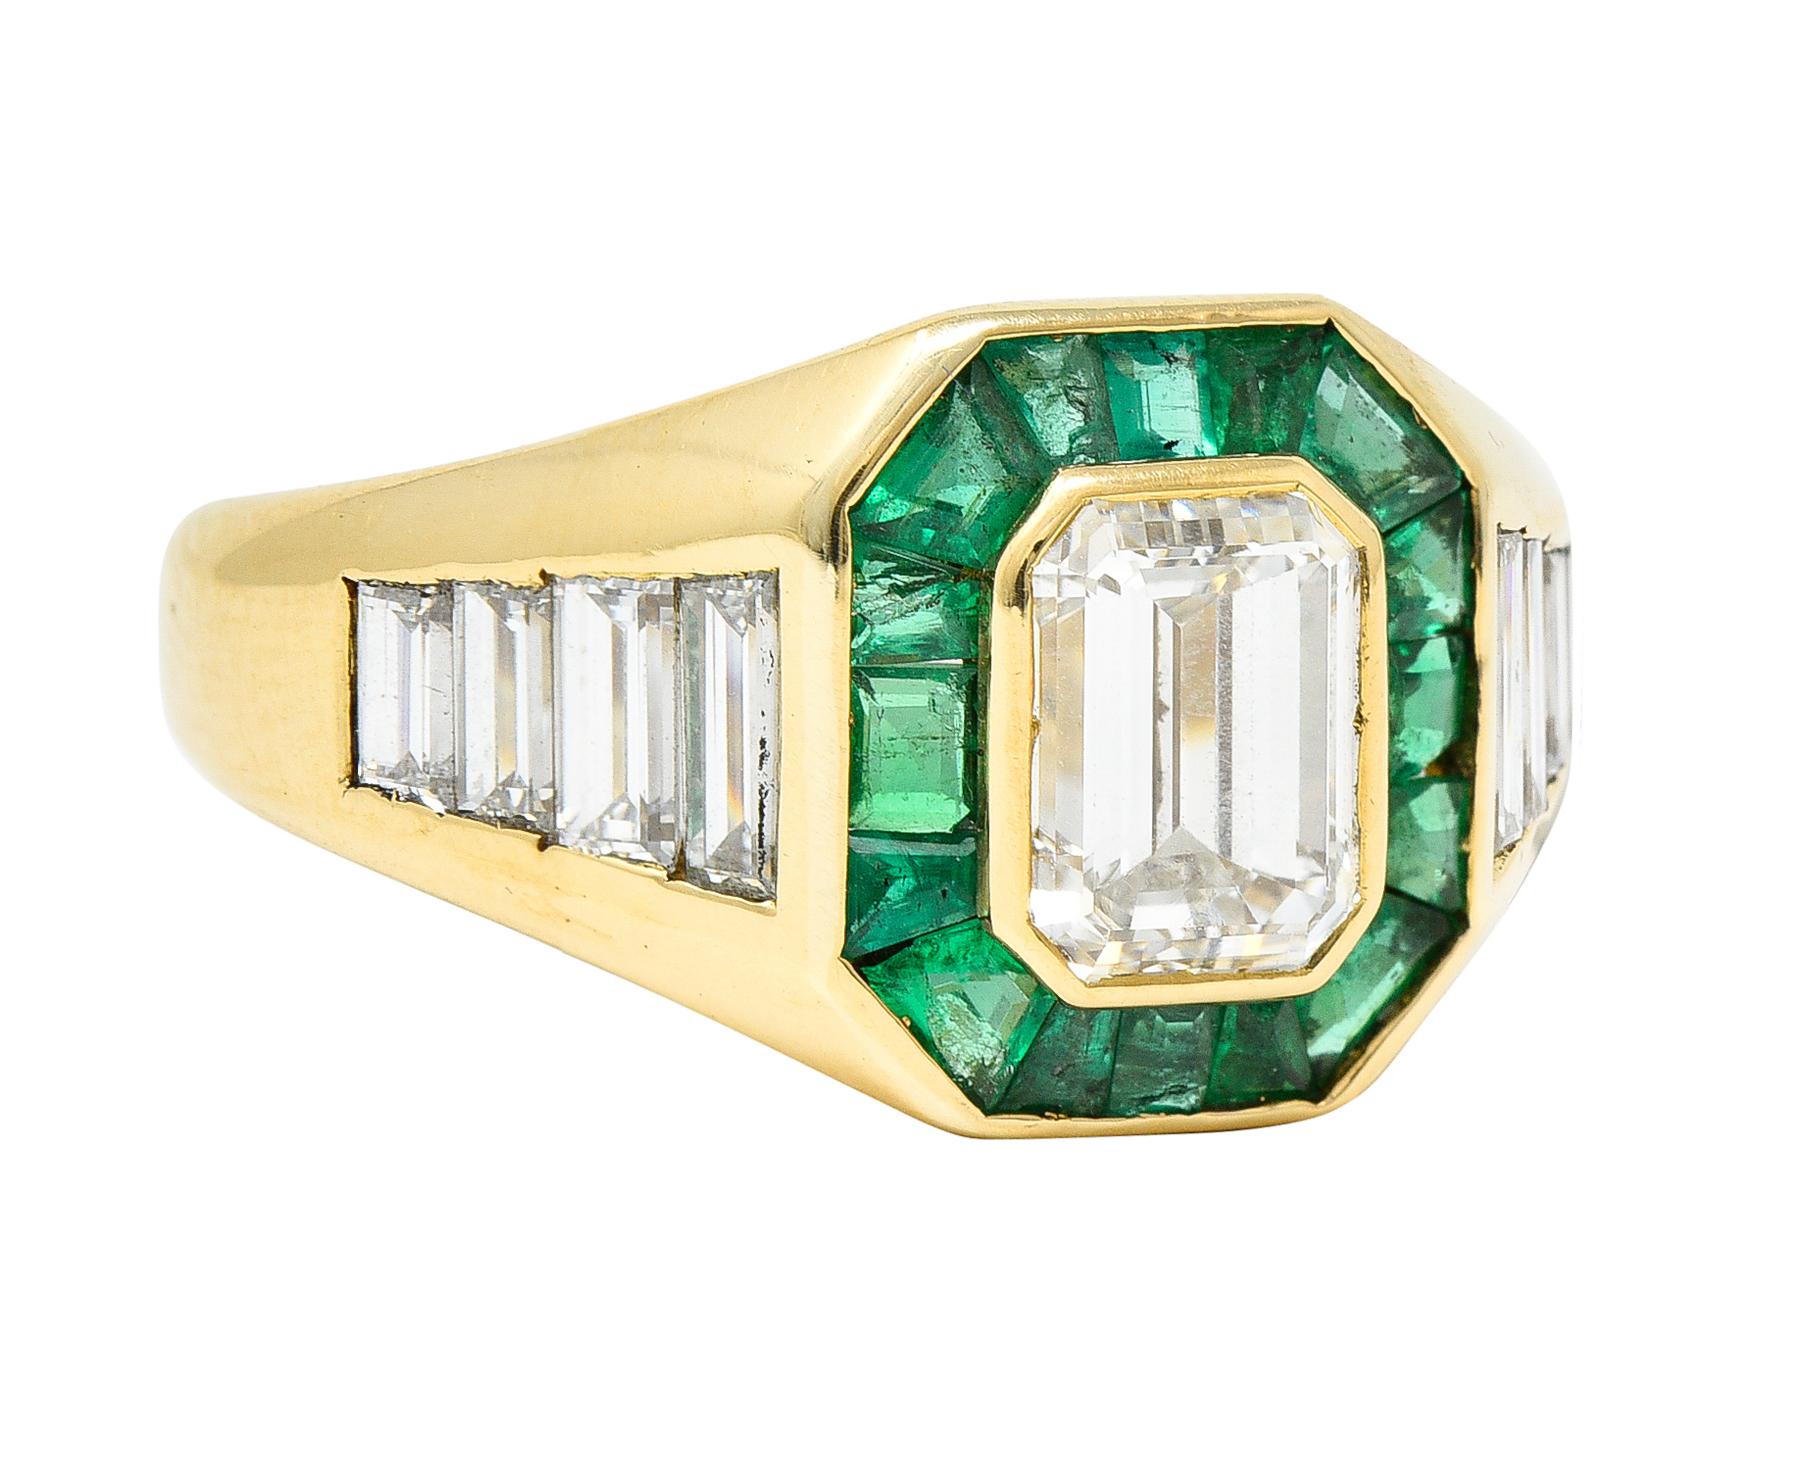 Gold band ring centers an emerald cut diamond weighing approximately 1.15 carat - H color with VS1 clarity

Surrounded by calibrè cut emeralds that weigh in total approximately 0.55 carat

Vividly green in color and semi-transparent with natural